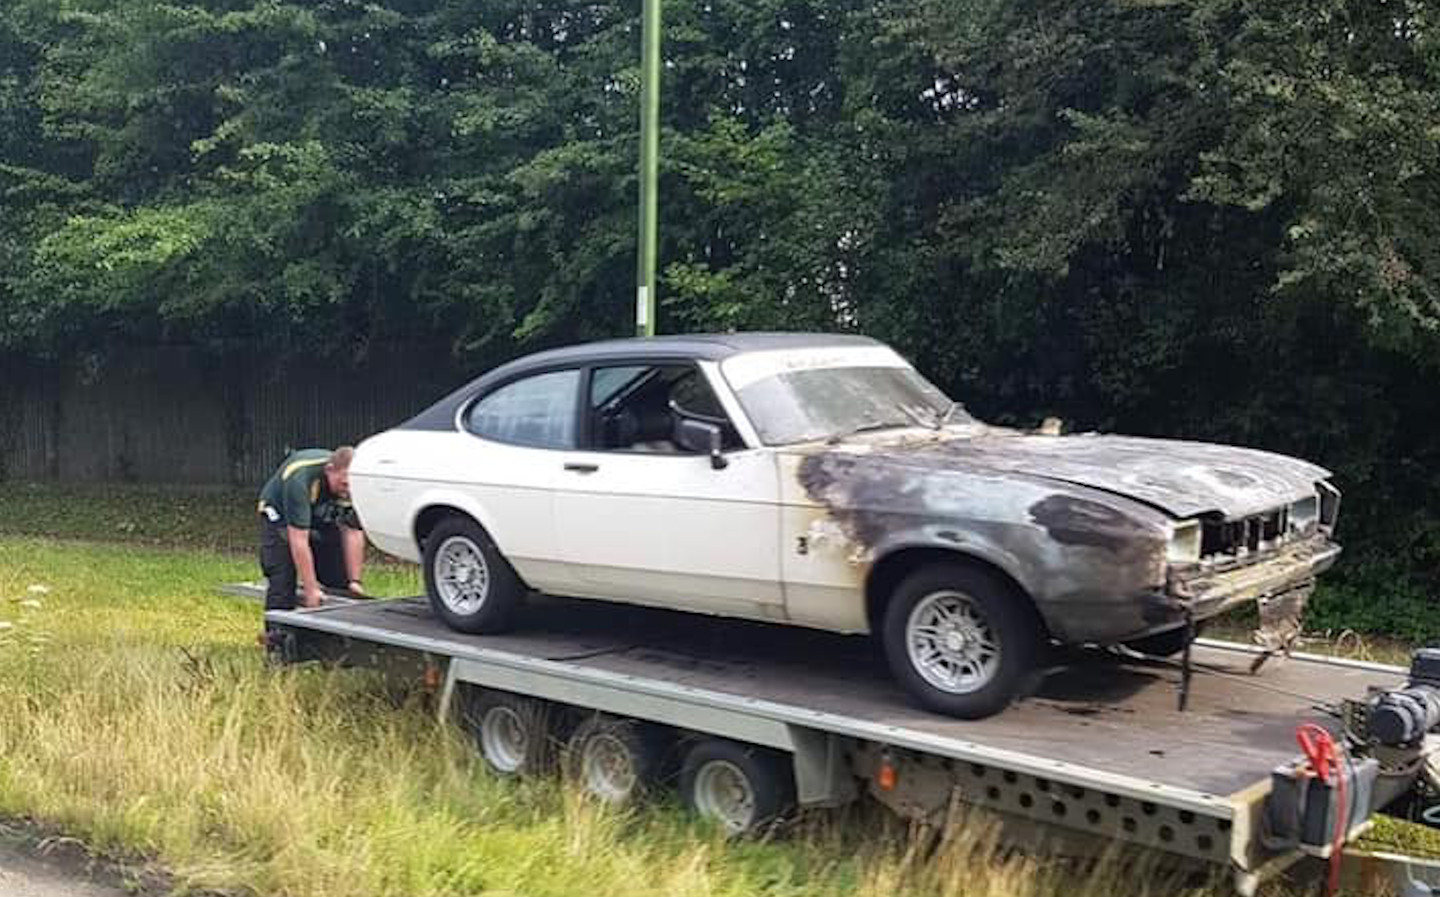 Minder Ford Capri fire not as bad as first thought